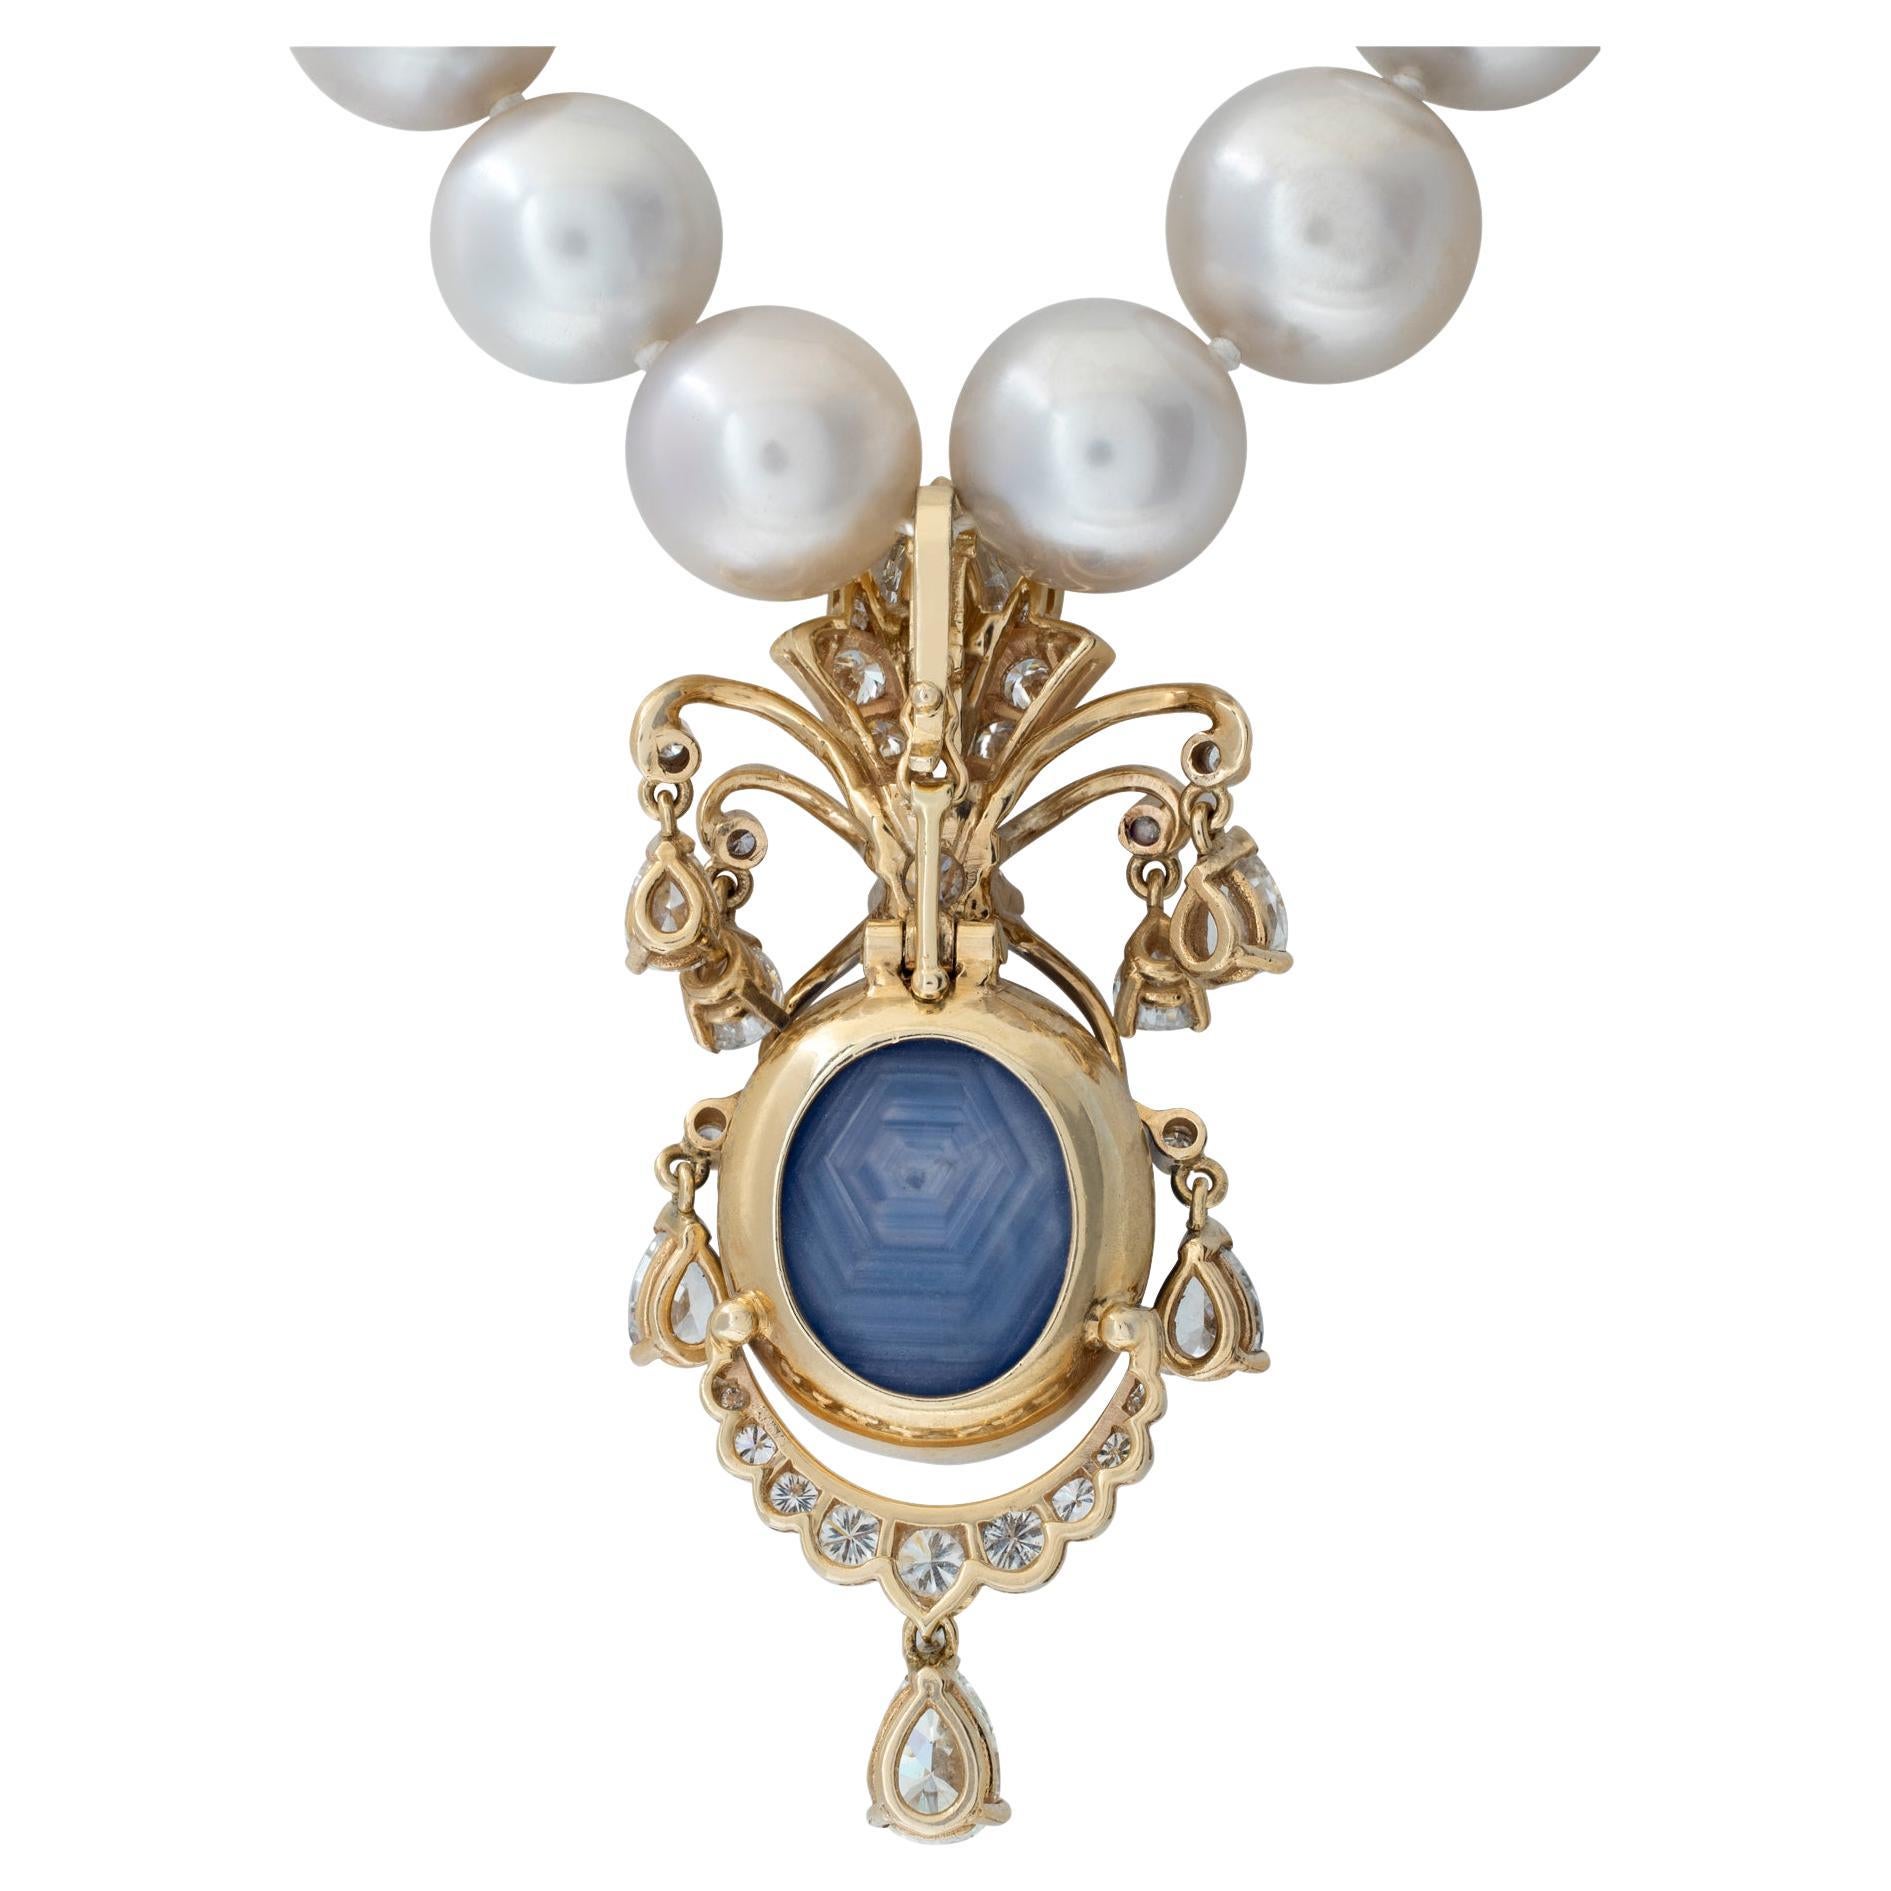 Graduating South Sea Pearl necklace with cabochon star sapphire & diamonds enhancer in 14K yellow gold. Necklace has 35 South Sea Pearl graduating from 10 mm to 12.5 mm with pave diamonds globe clasp. Enhancer has one center cabochon star sapphire